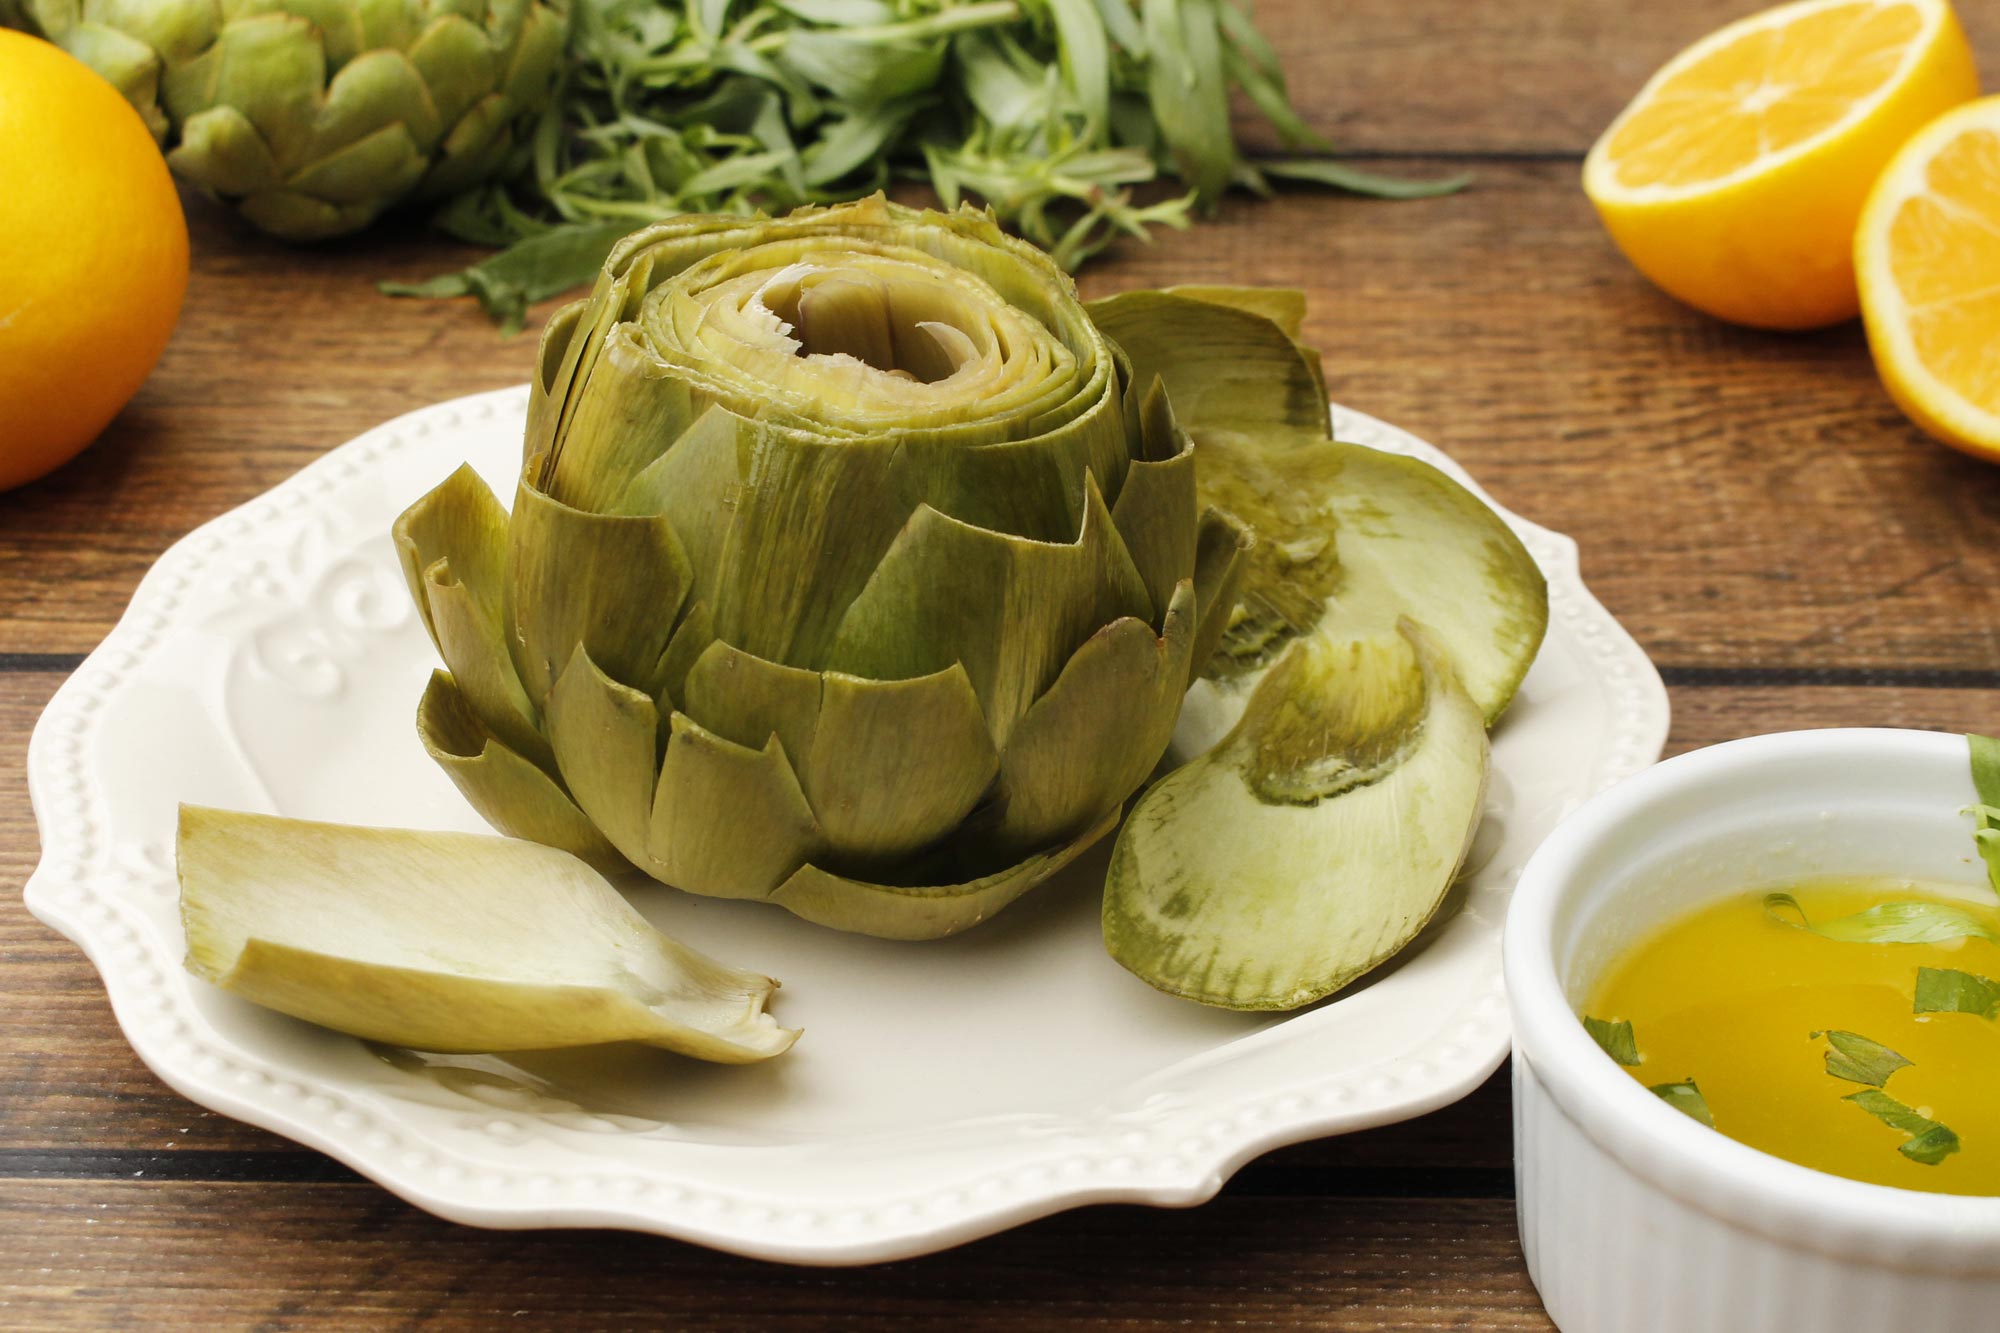 Steamed Artichokes with Tarragon Butter